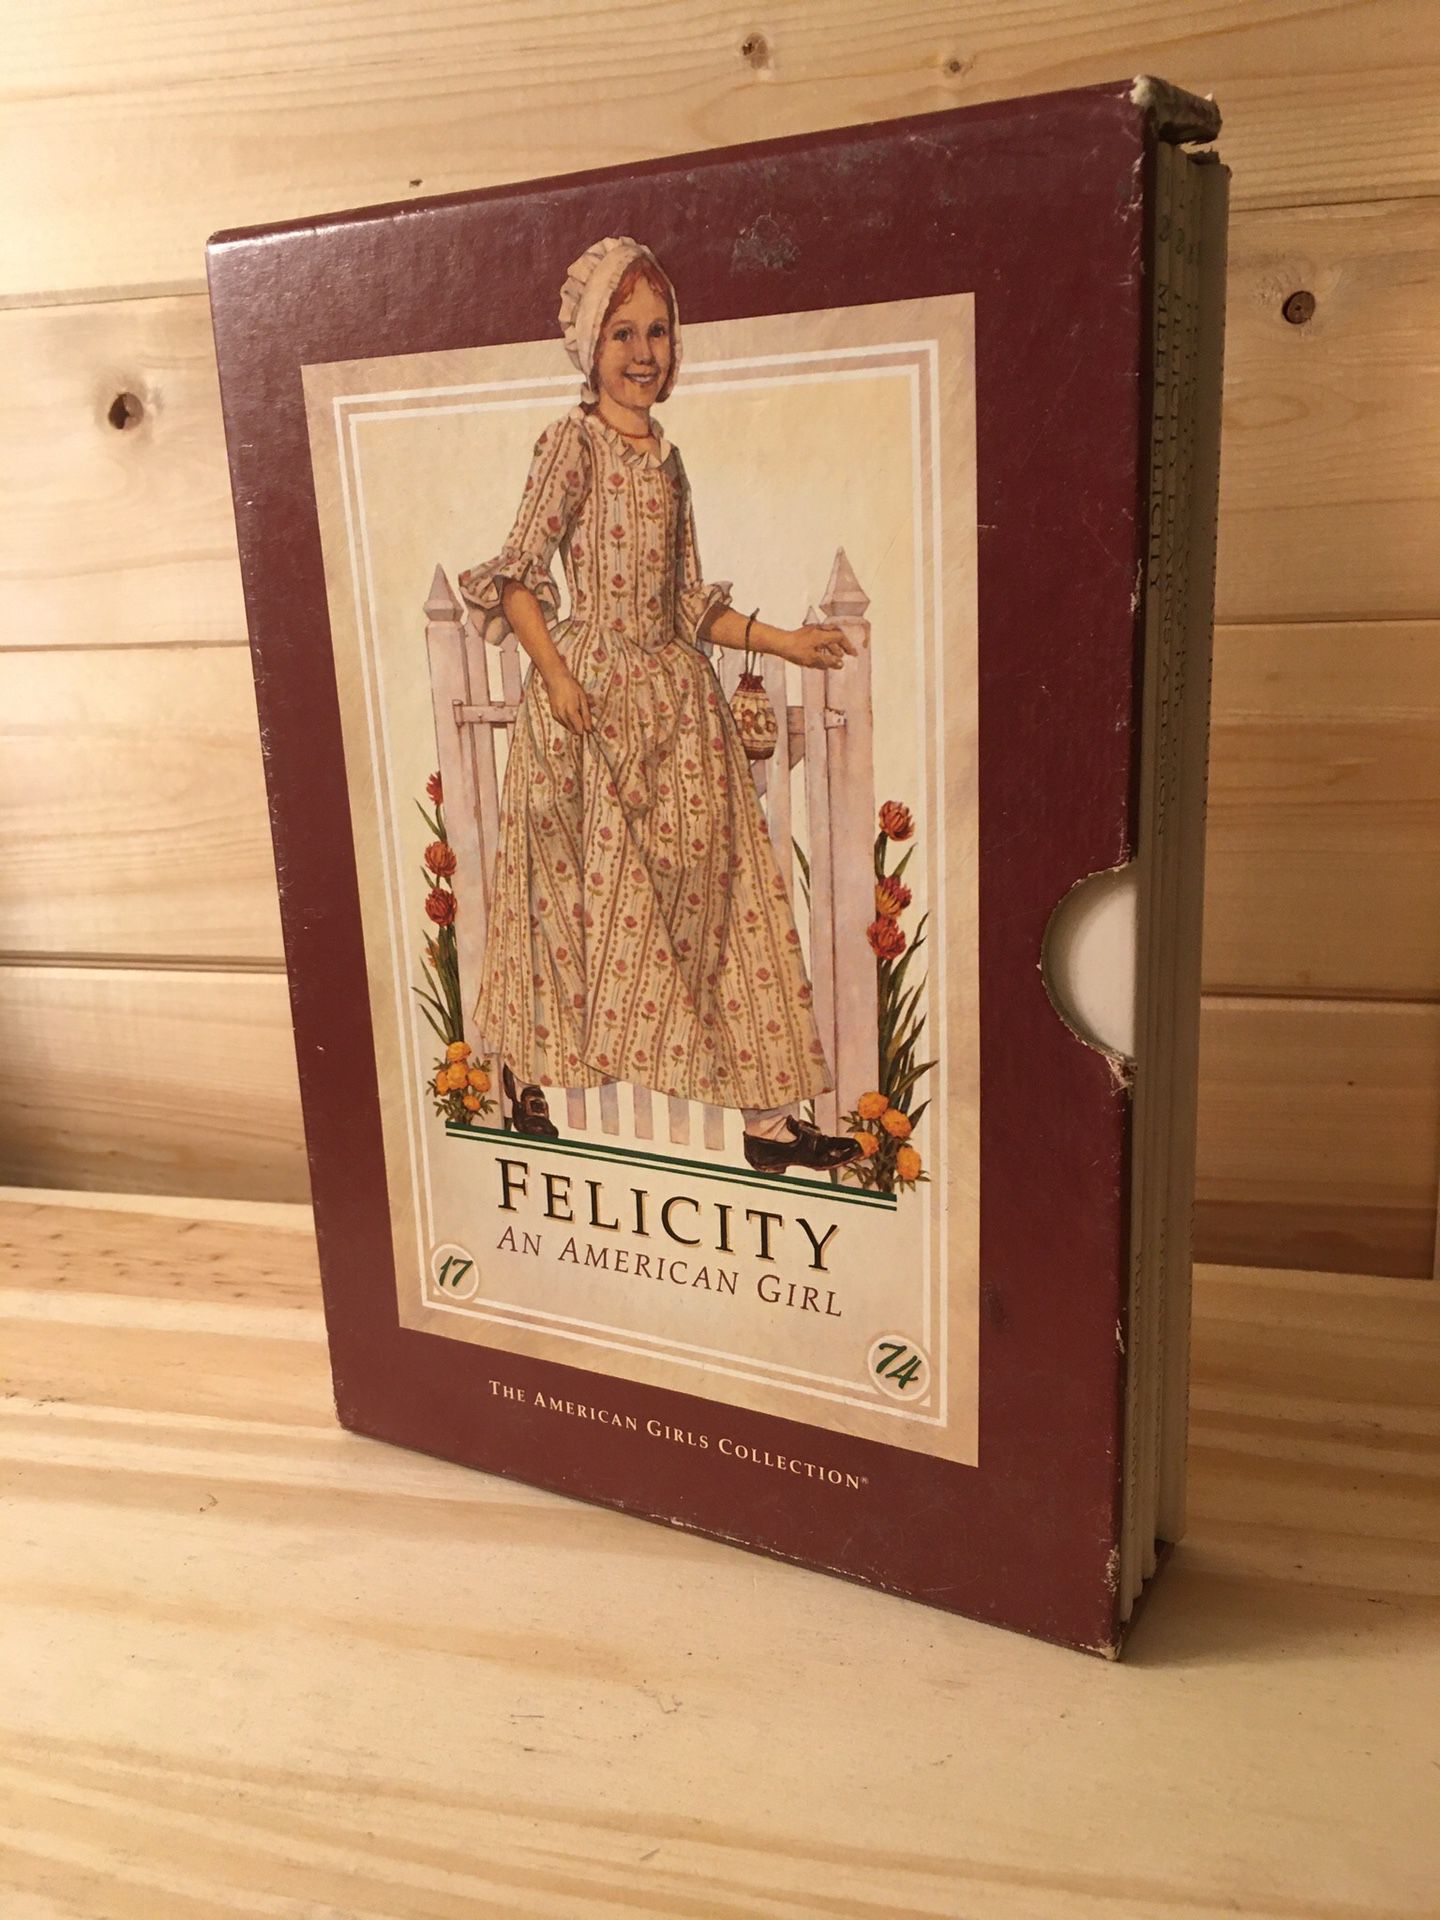 ALL AMERICAN GIRL - COMPLETE “FELICITY” SET